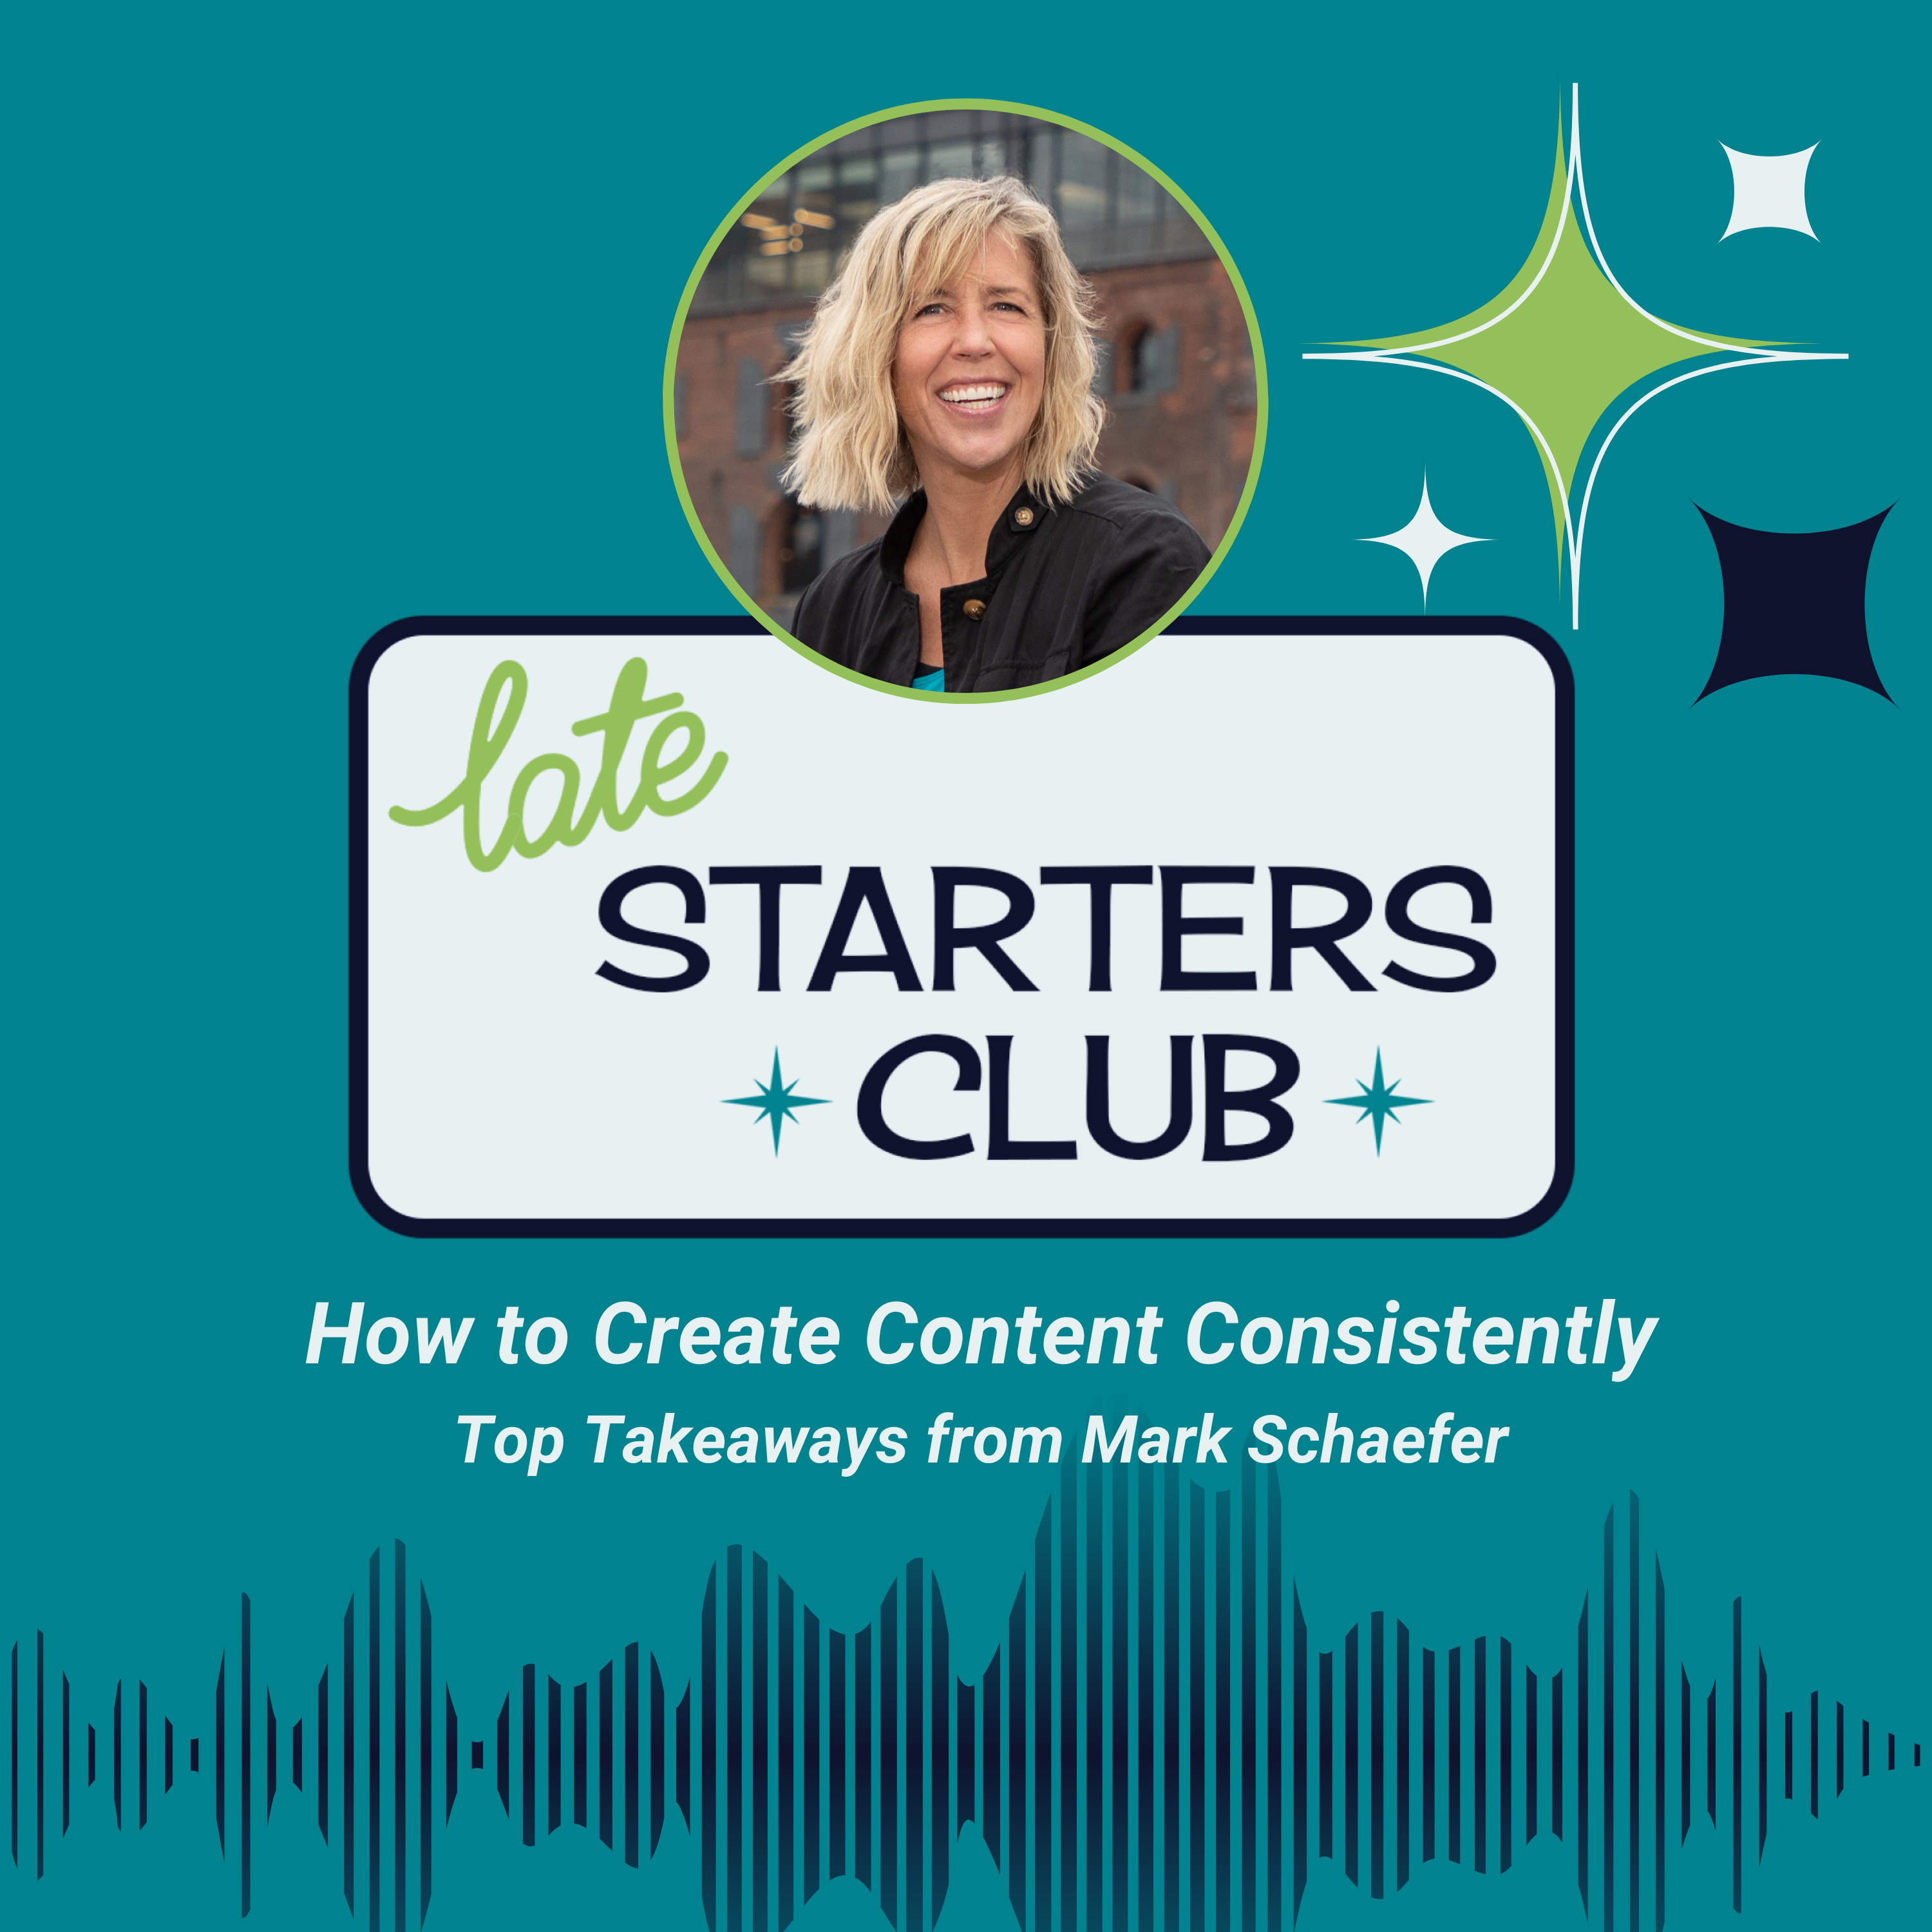 47: How to Create Content Consistently- Top Takeaways from Mark Schaefer